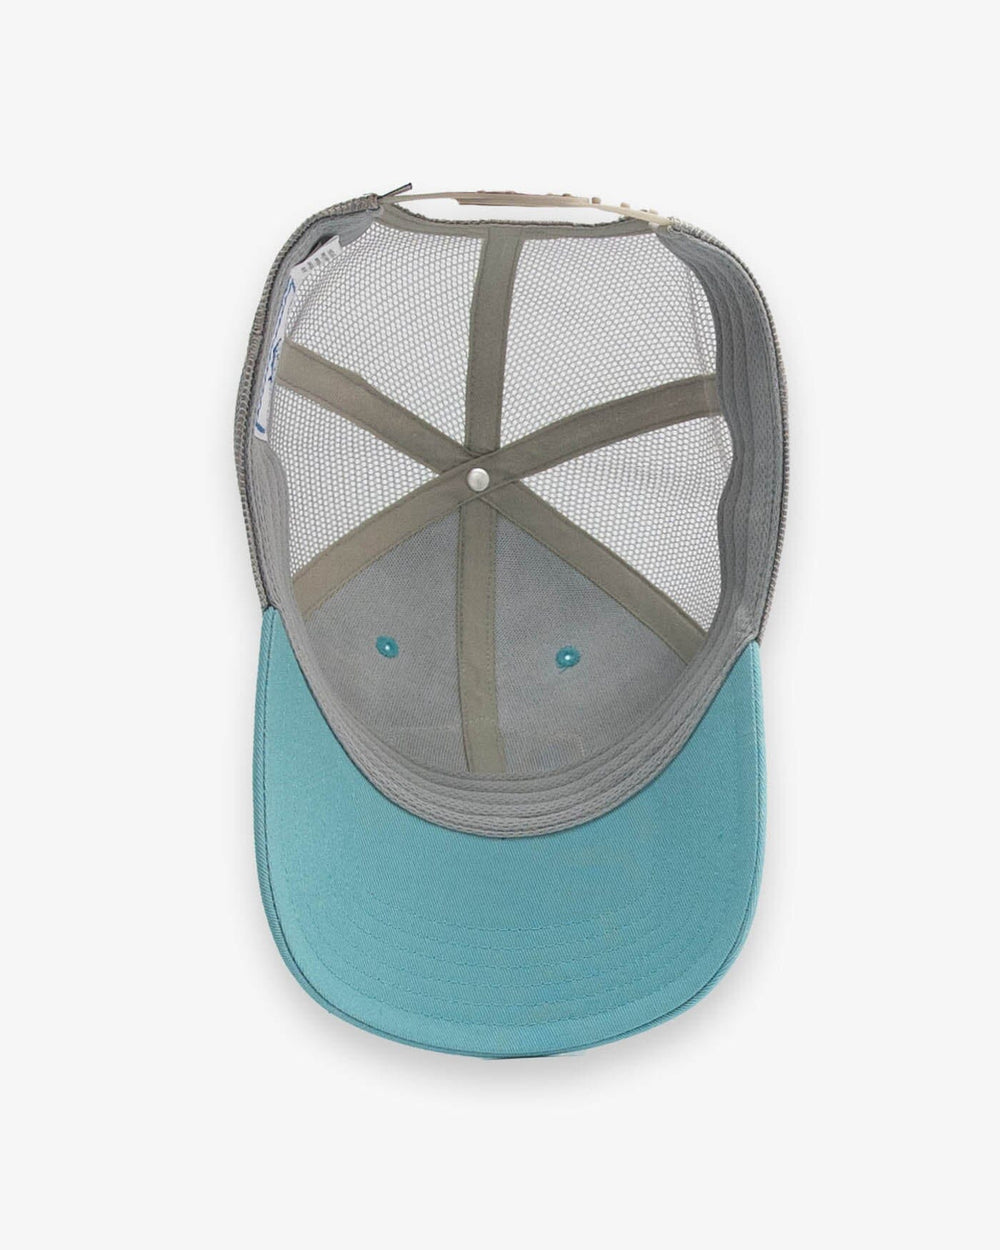 The detail view of the Southern Tide Skipjack Trademark Trucker Hat by Southern Tide - Blue